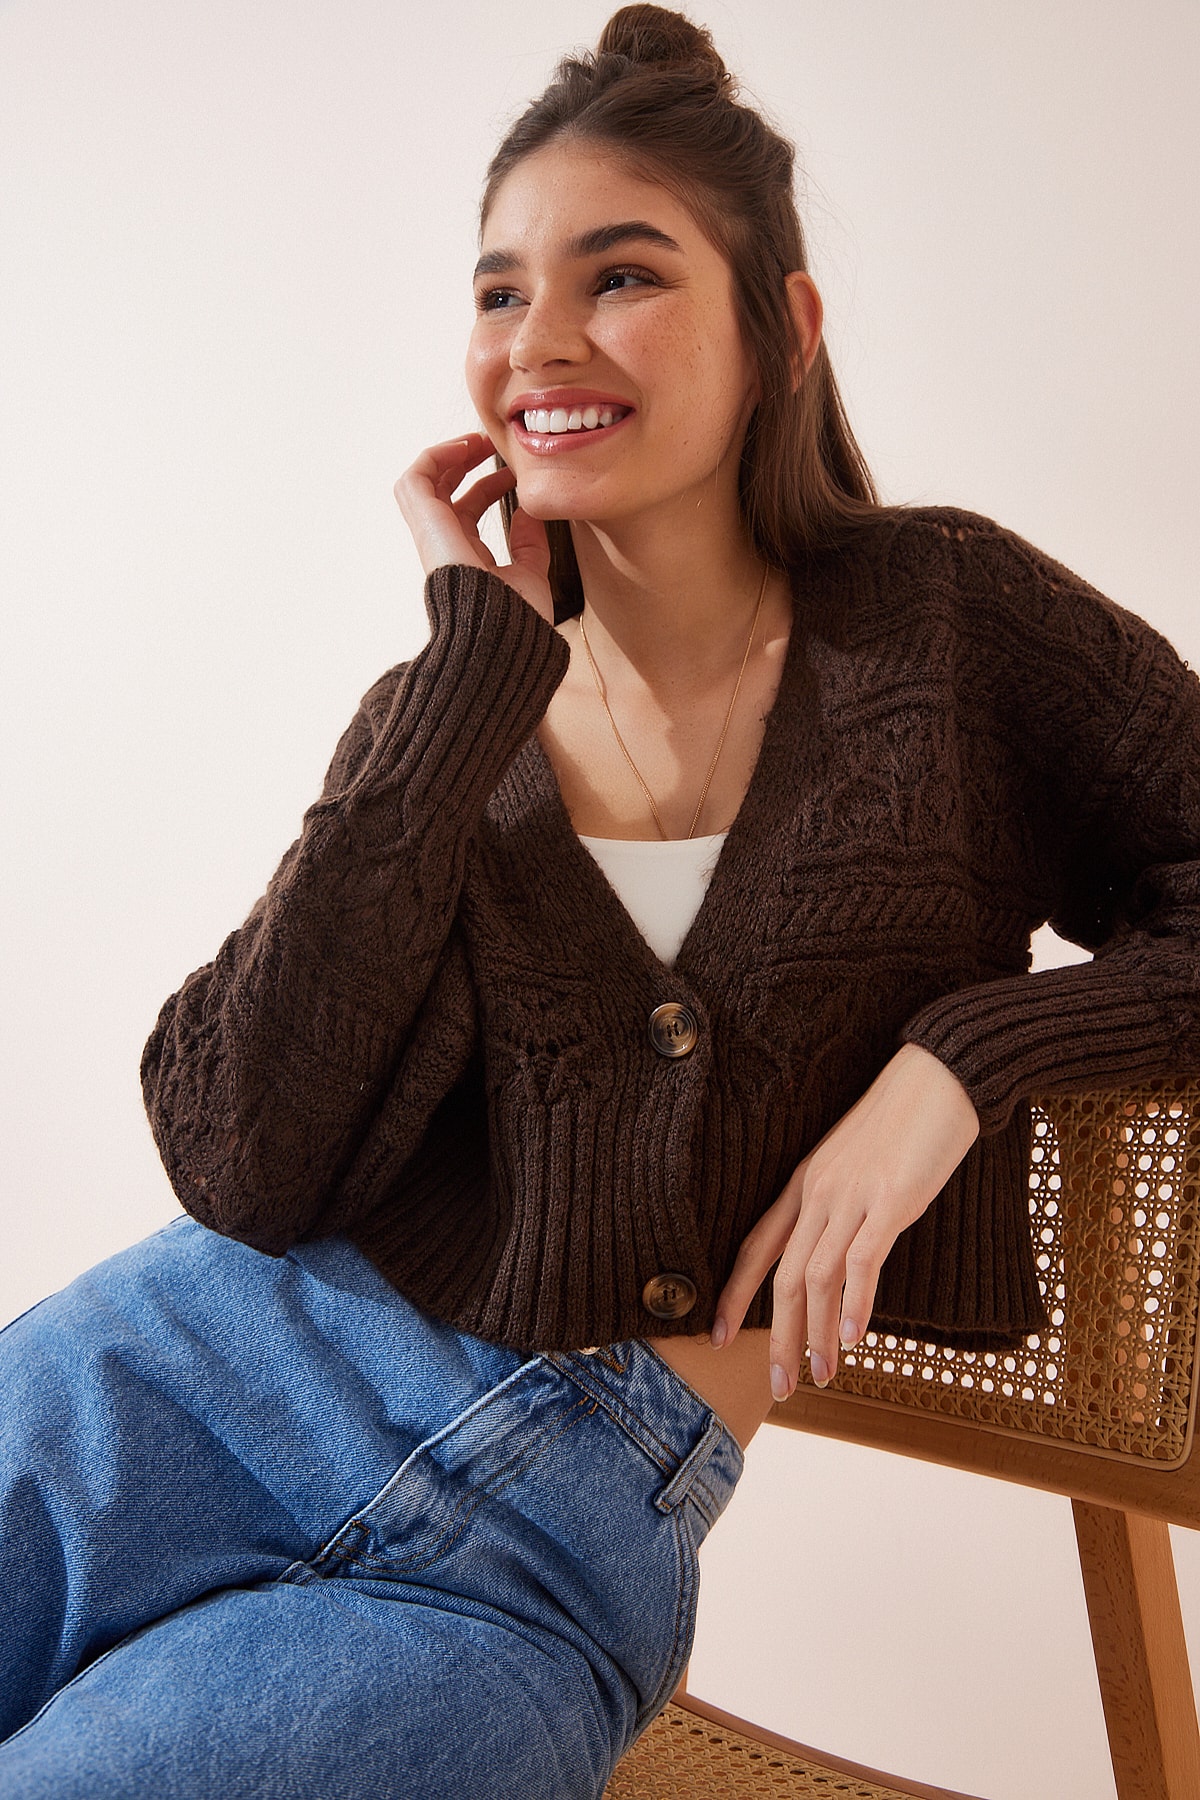 Happiness İstanbul Women's Brown Patterned V-Neck Knitwear Cardigan